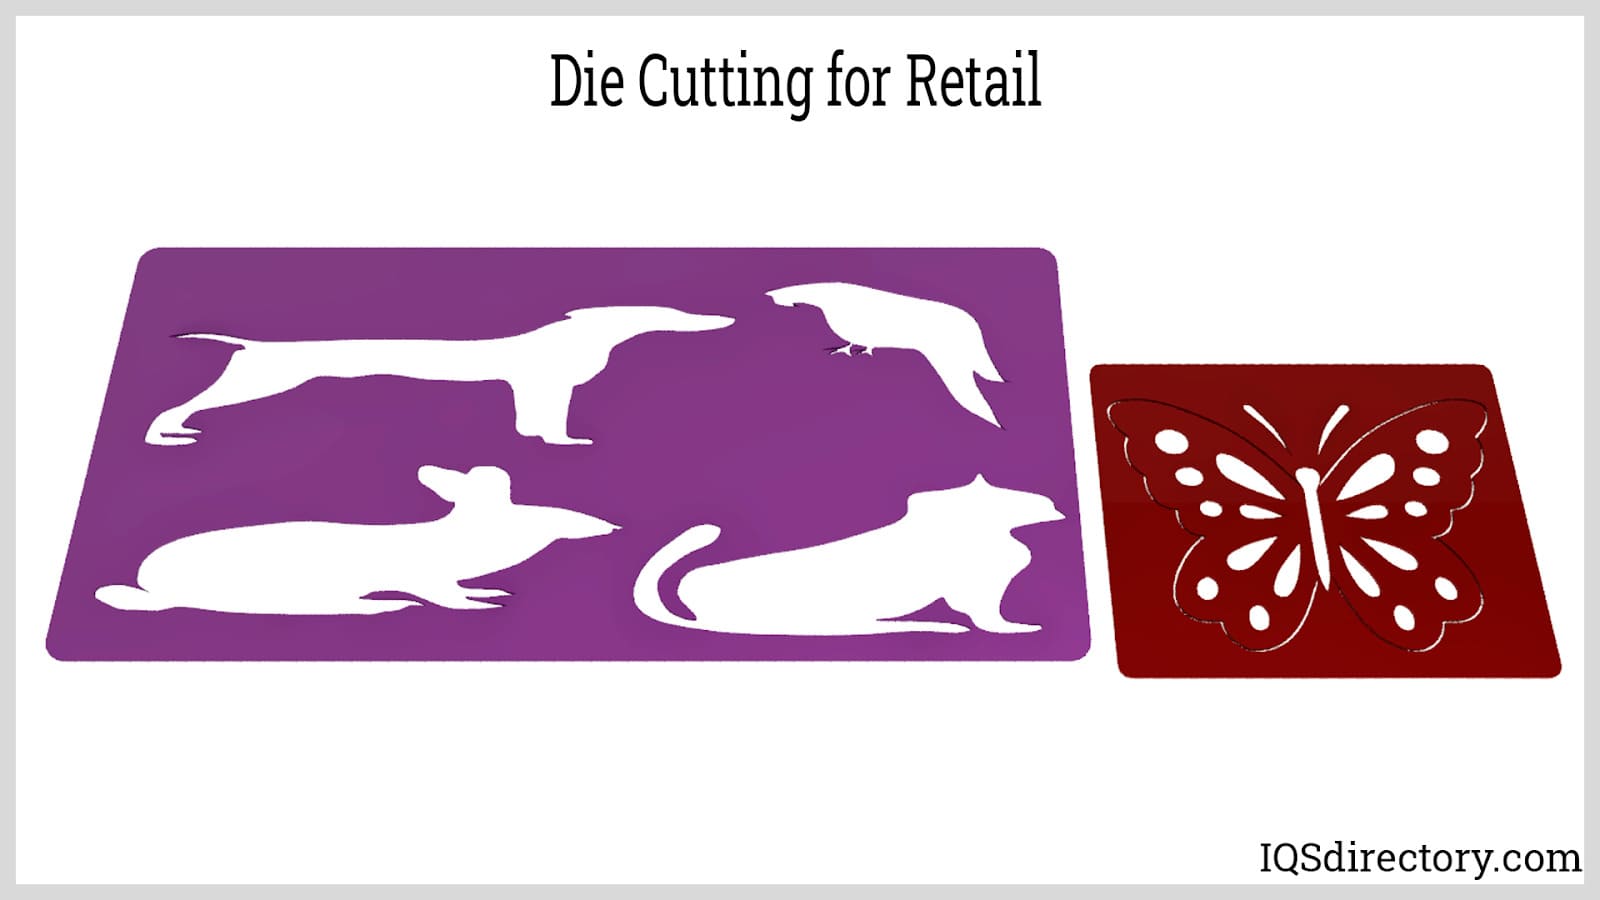 Die Cutting for Retail